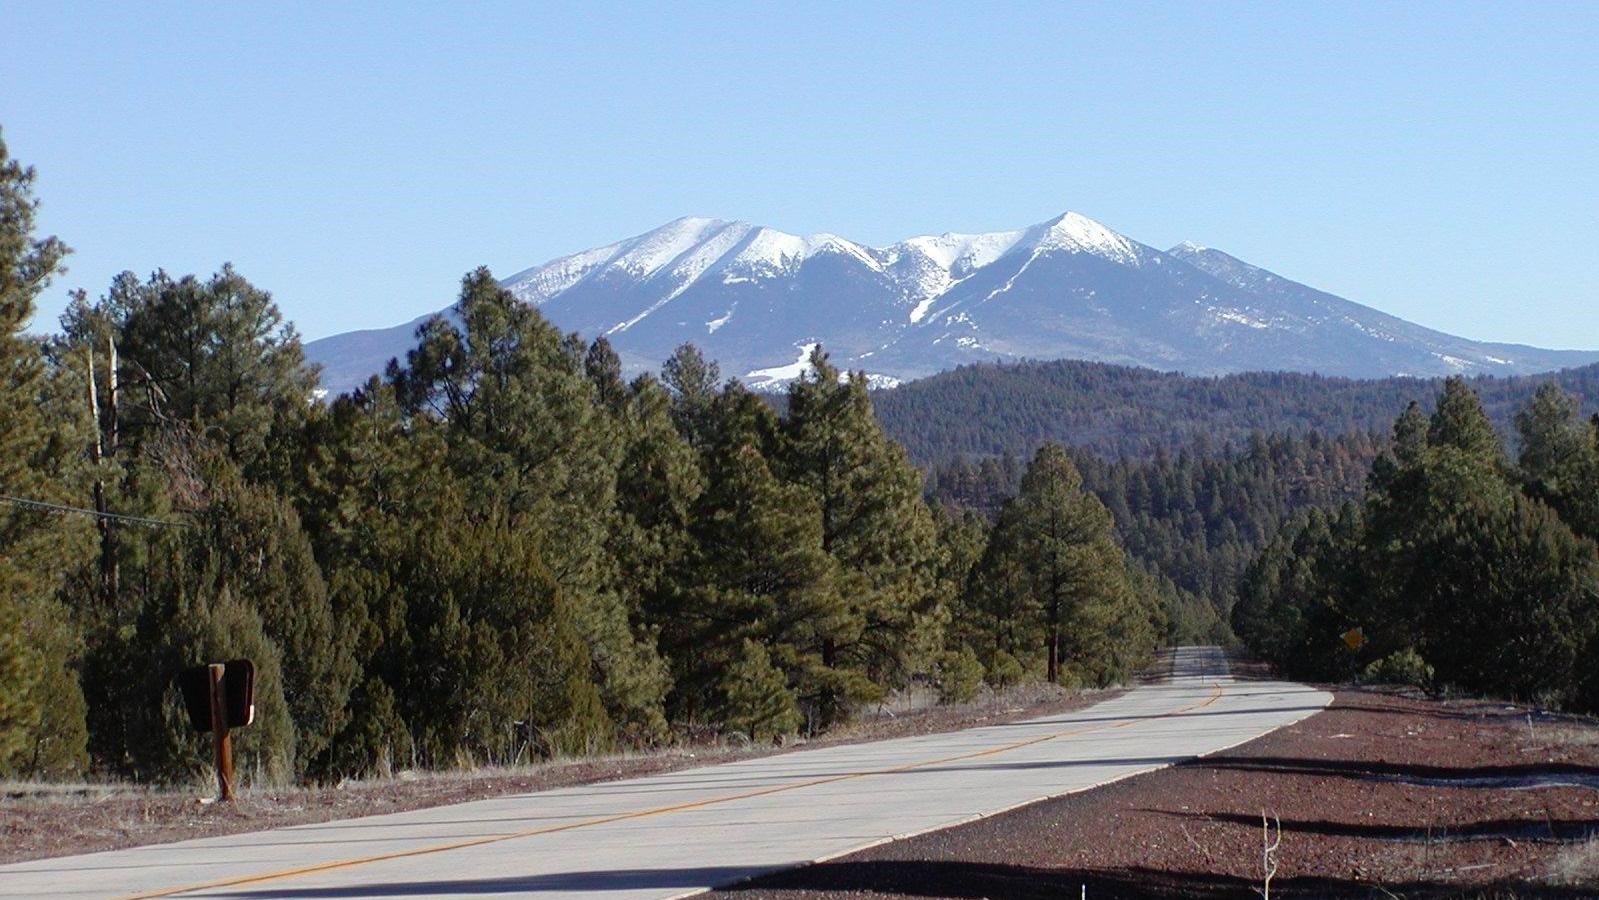 A paved road winds through a pine forest toward snow-capped mountains in the distance.